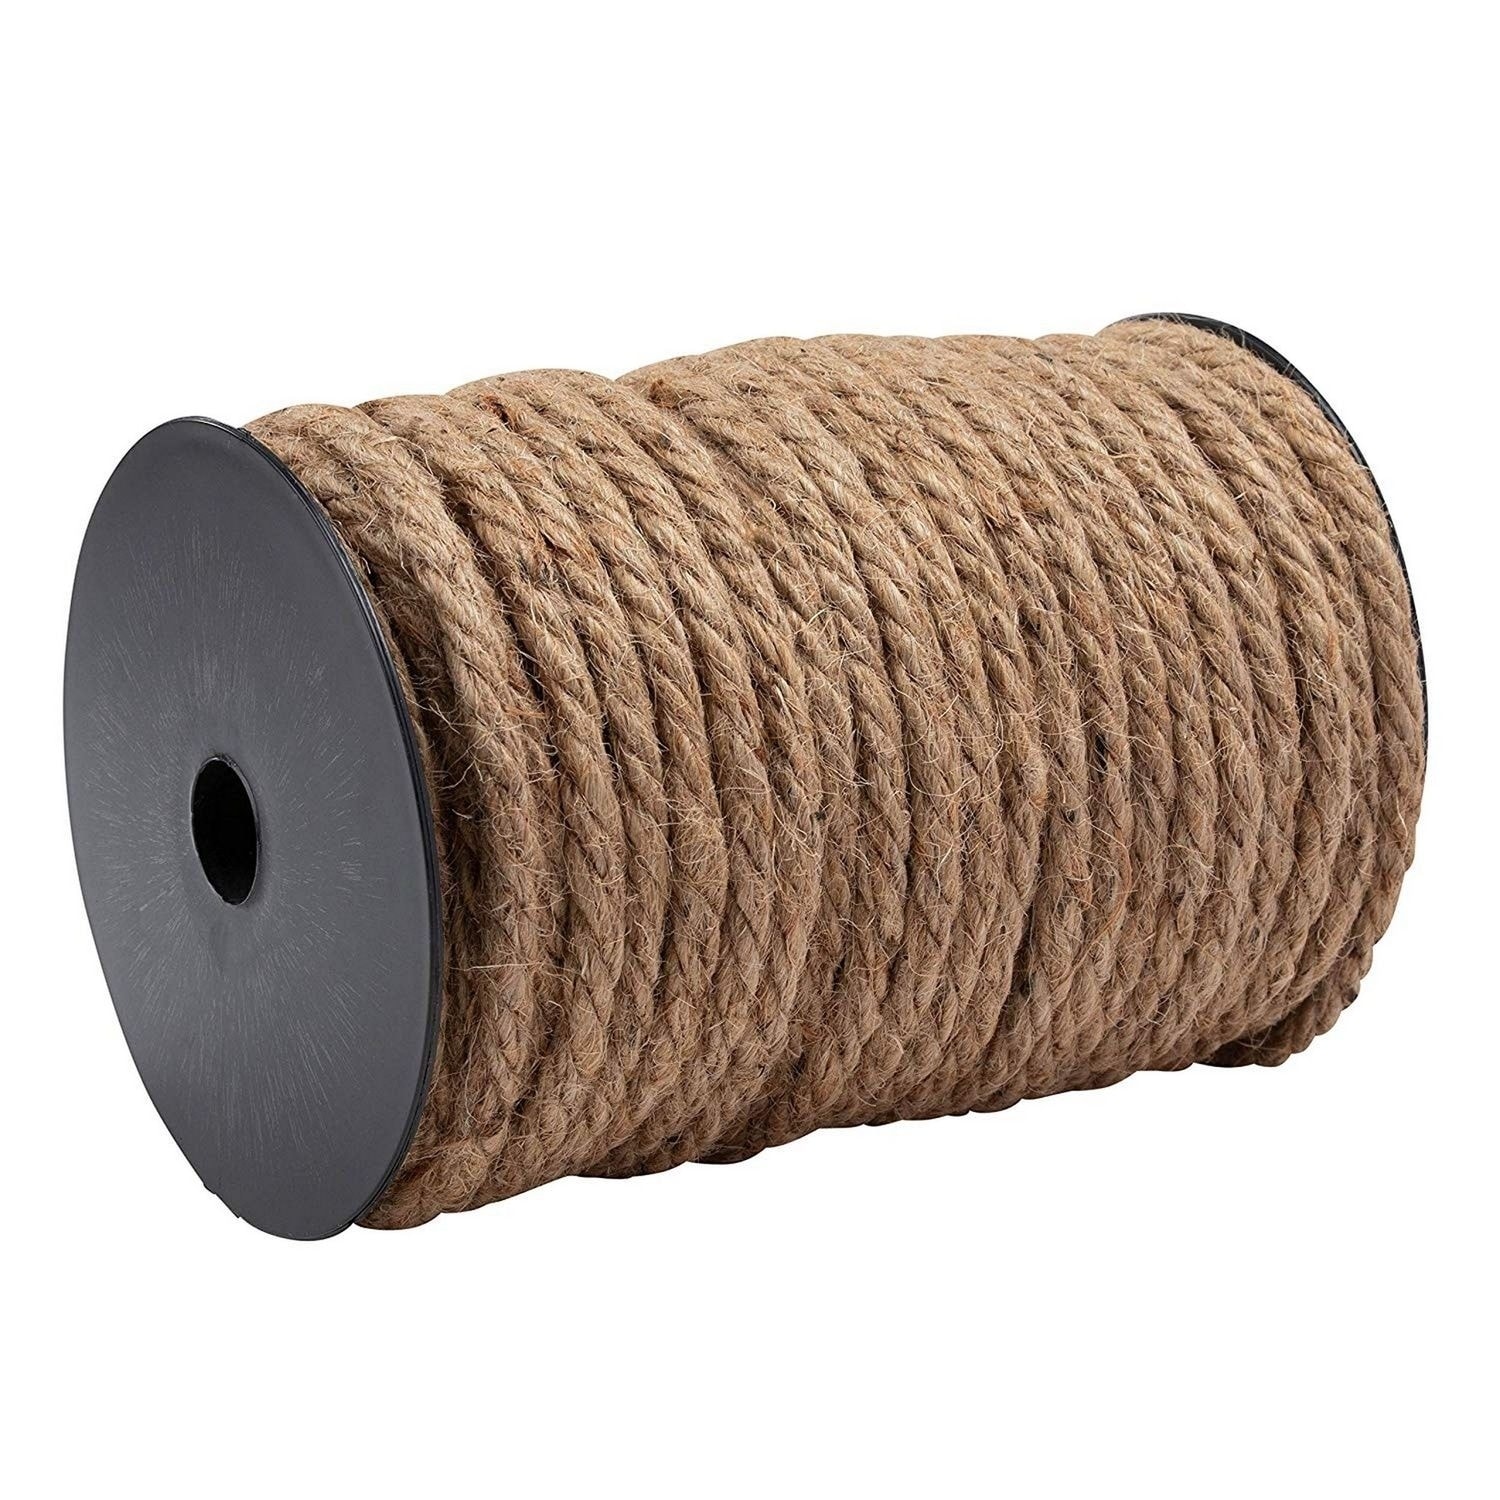 https://ak1.ostkcdn.com/images/products/29713737/6mm-Natural-Jute-Hemp-Rope-Thick-Twine-String-for-DIY-Crafts-Packing-100-Feet-73d8a852-9514-47ec-a721-63c6d6830c5f.jpg